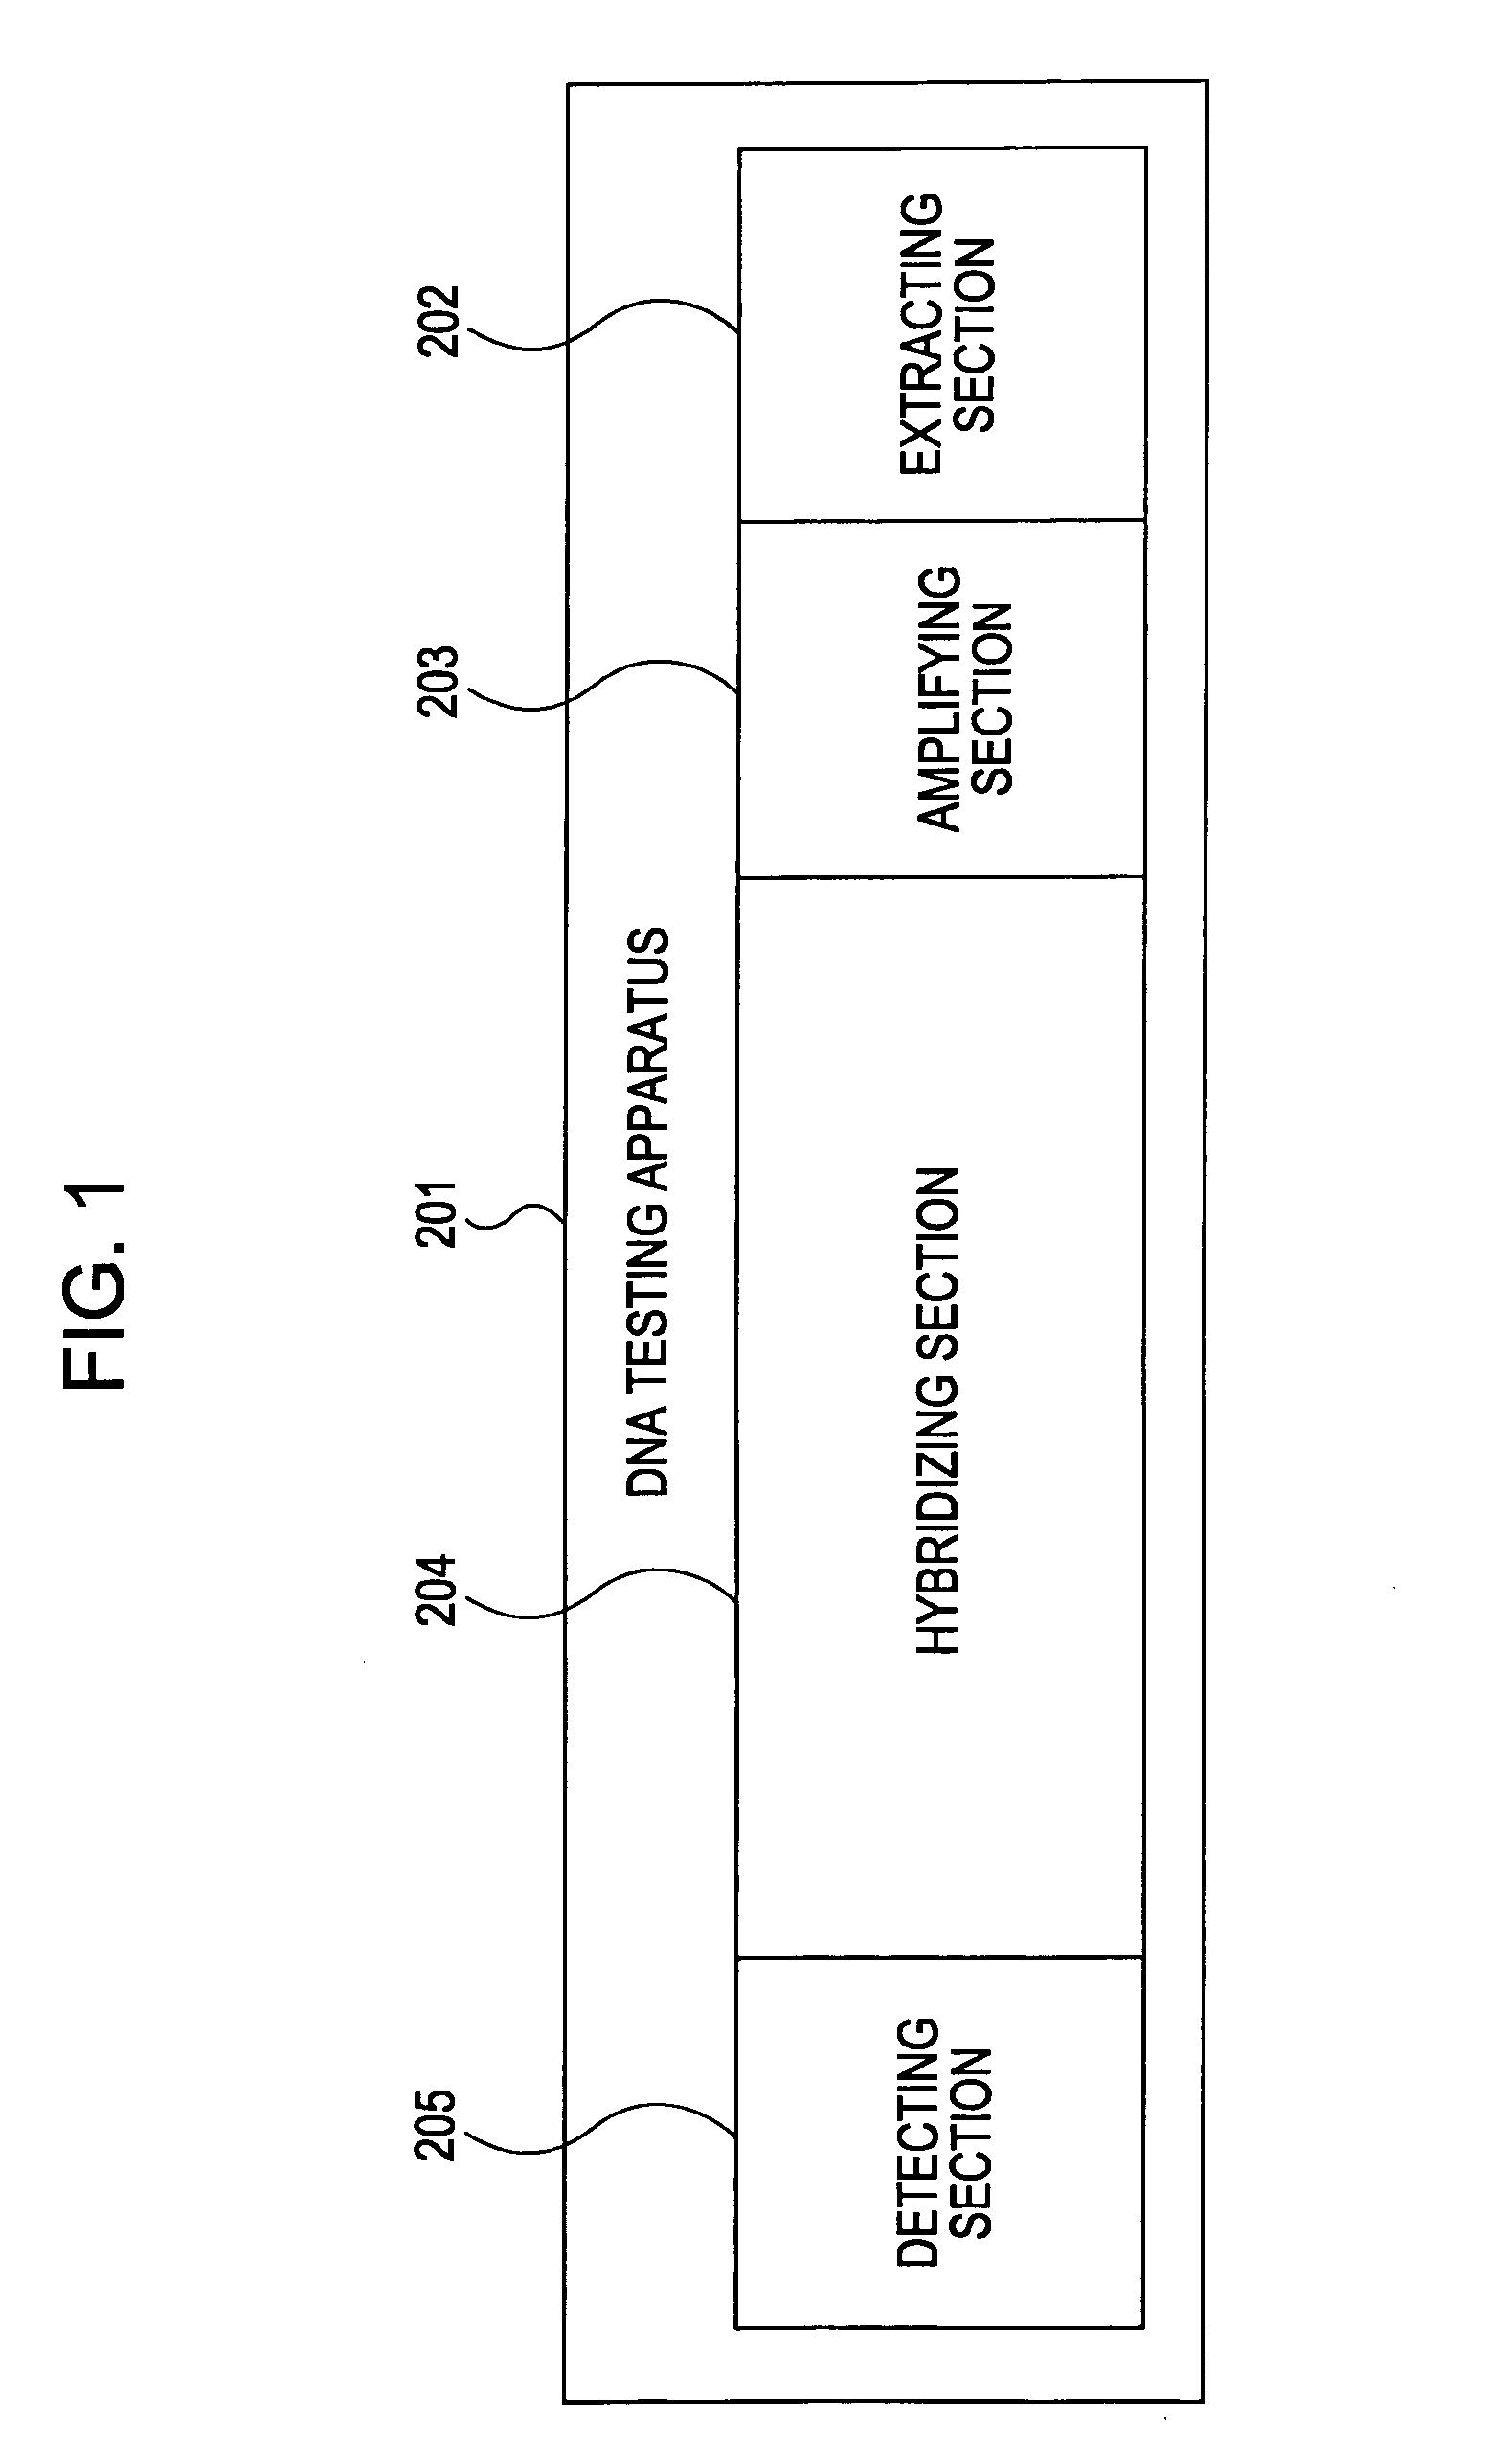 Apparatus for performing biochemical processing using container having wells